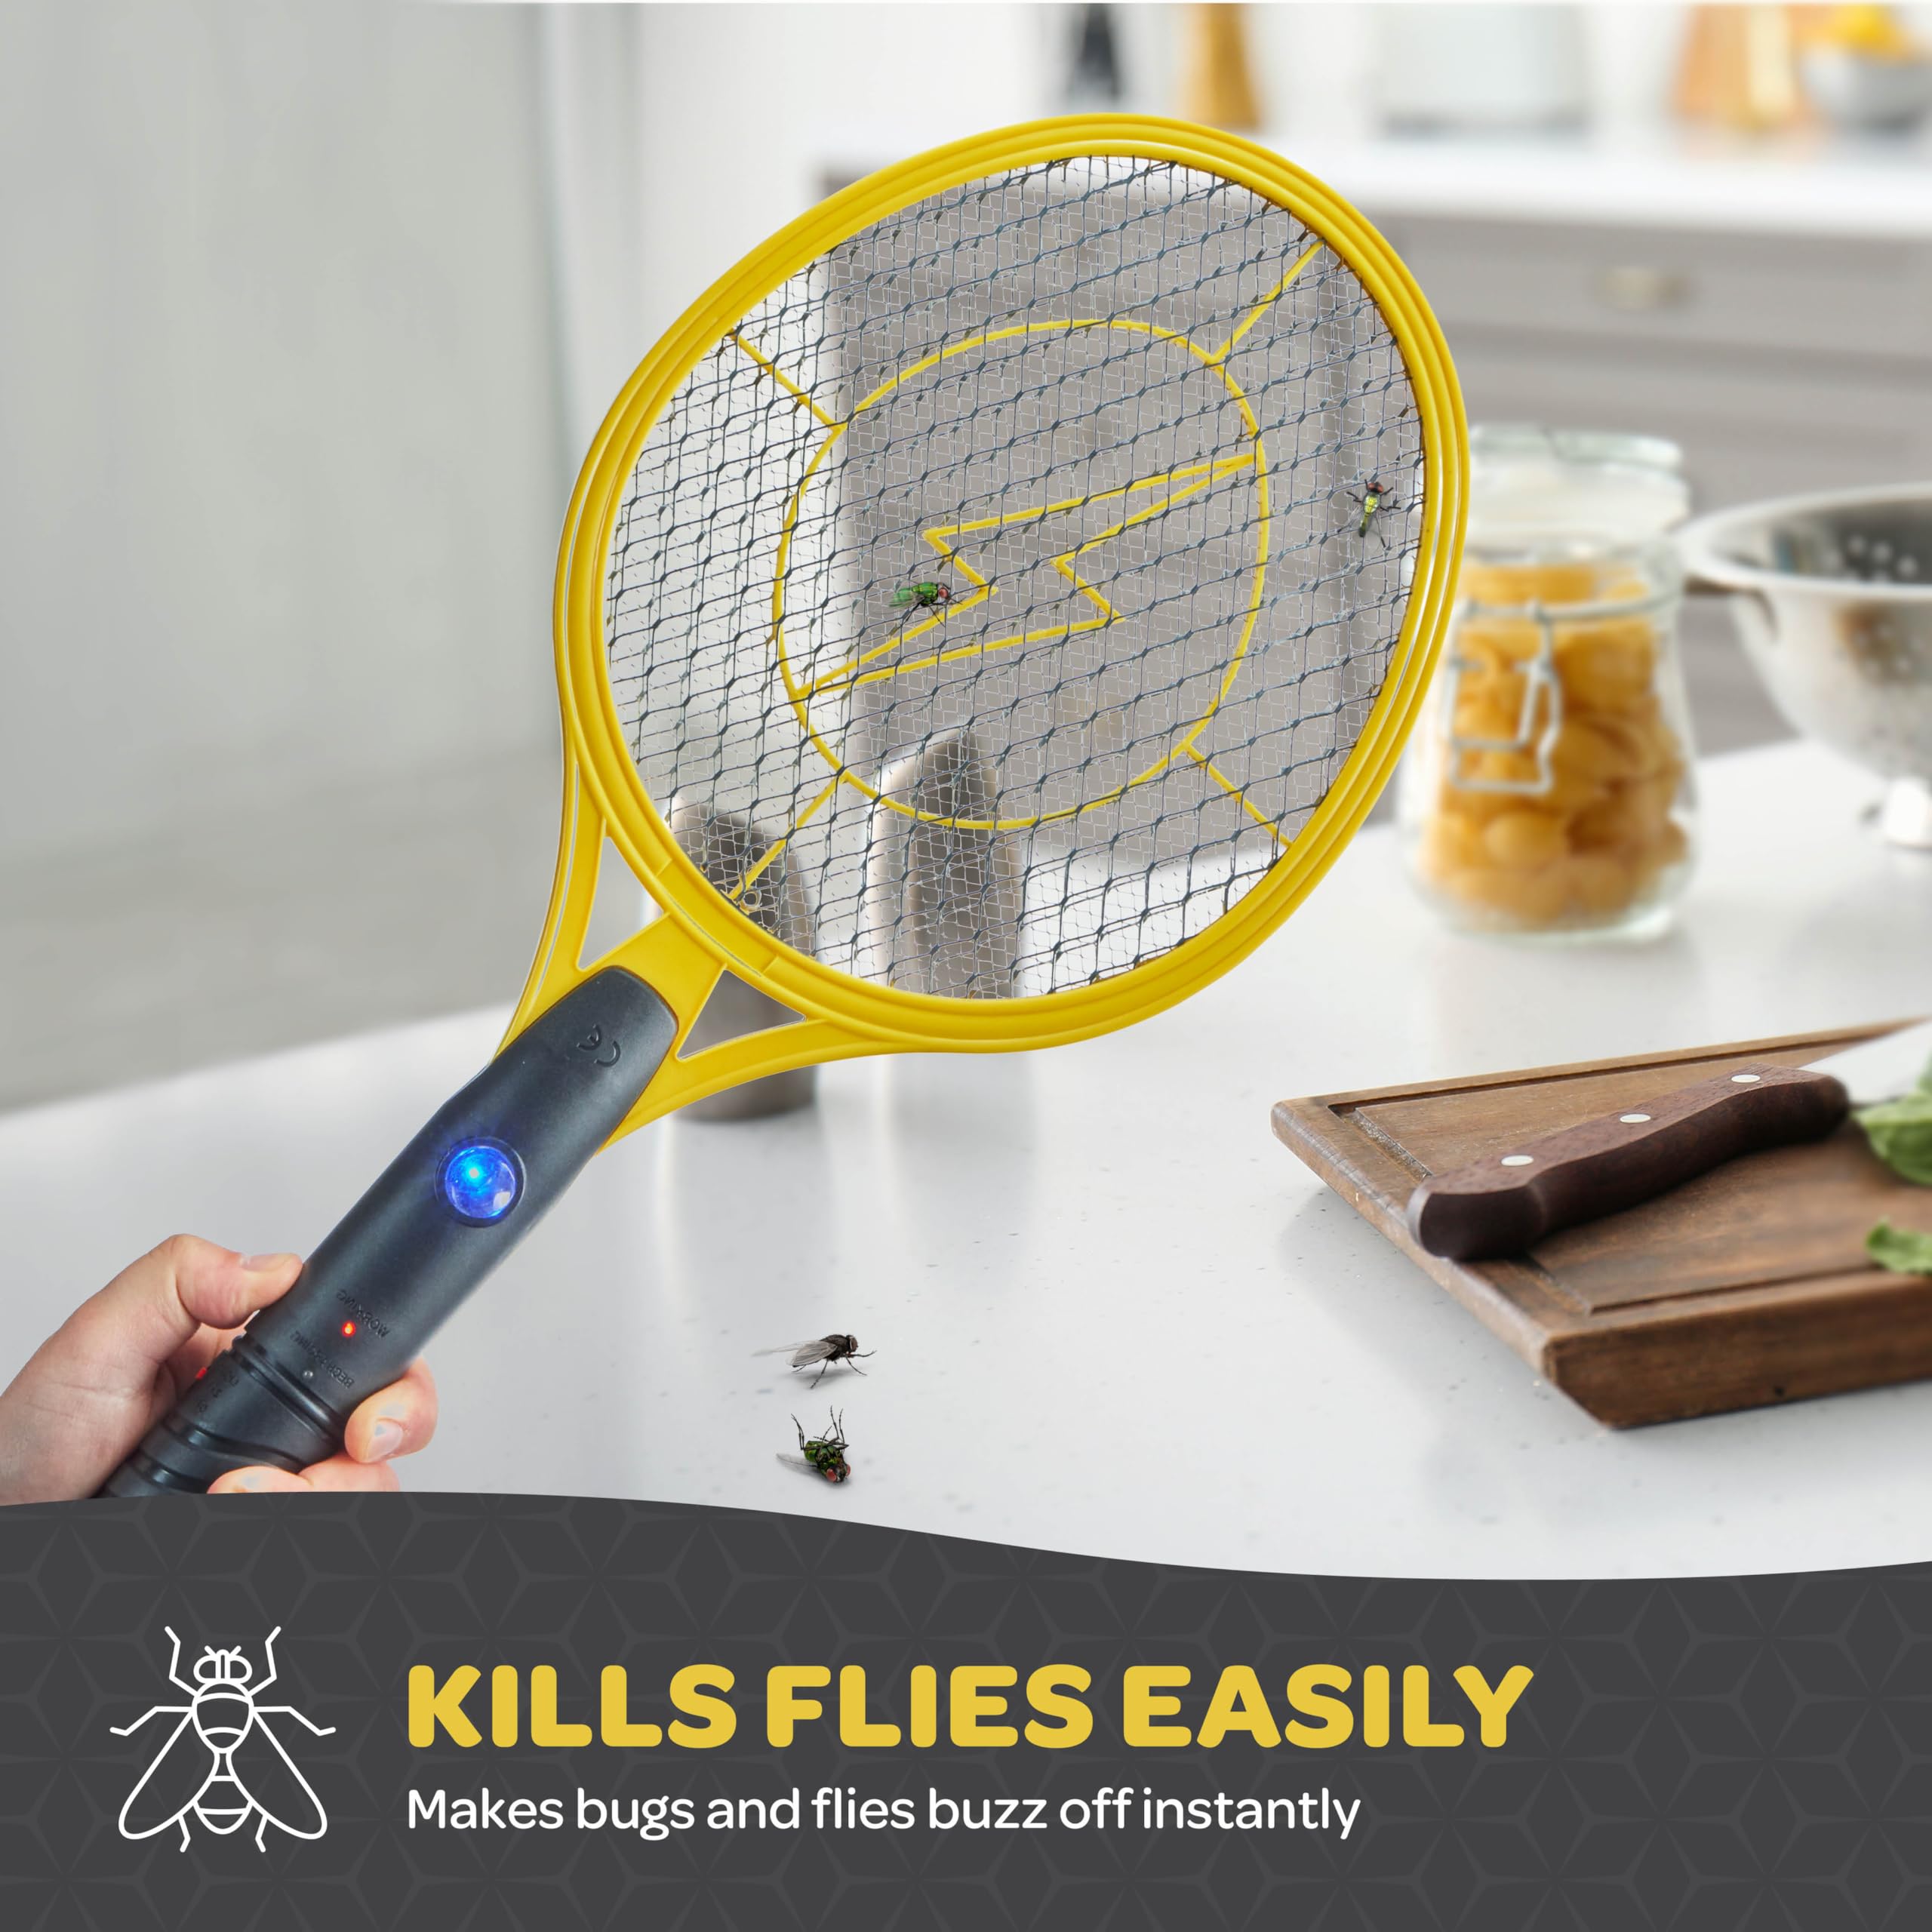 Electric 4000 Volt Fly Swatter [Set of 2] Handheld Bug Zapper Racket for Indoor/Outdoor - Instant Bug & Mosquito Killer with Attractant LED Light - USB Rechargeable Portable Fly Zapper.  - Like New